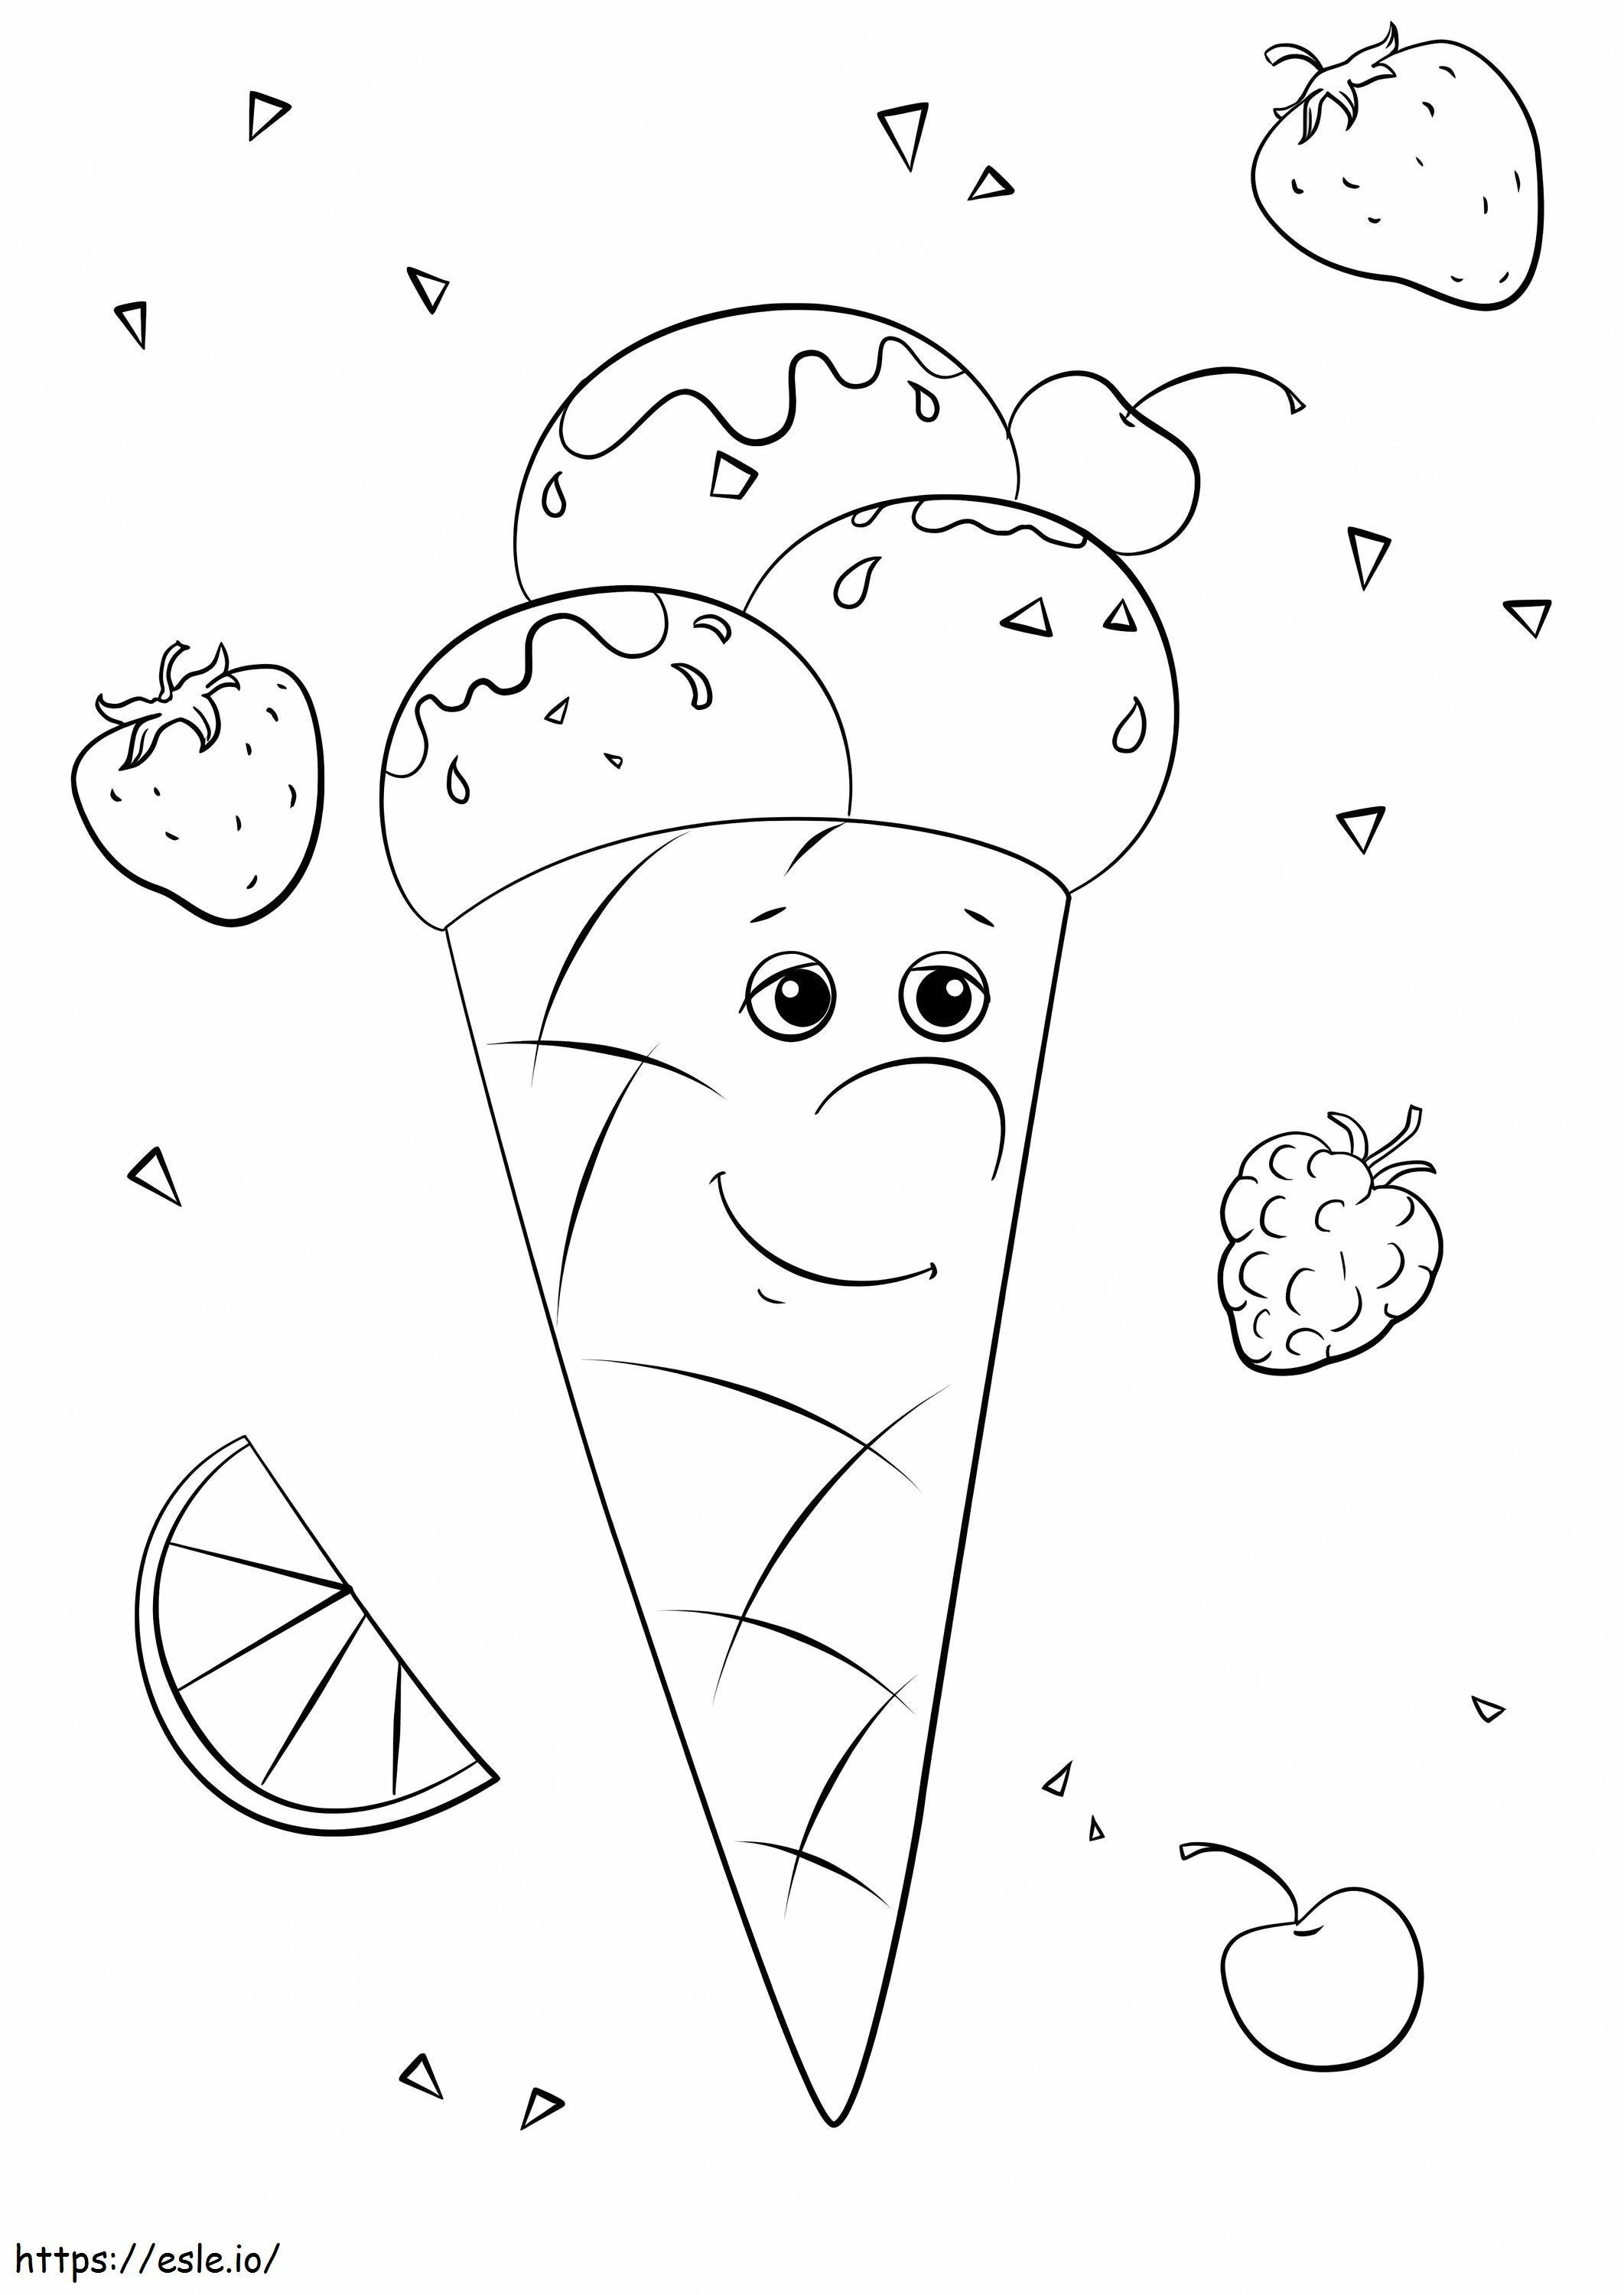 Ice Cream Smiling coloring page